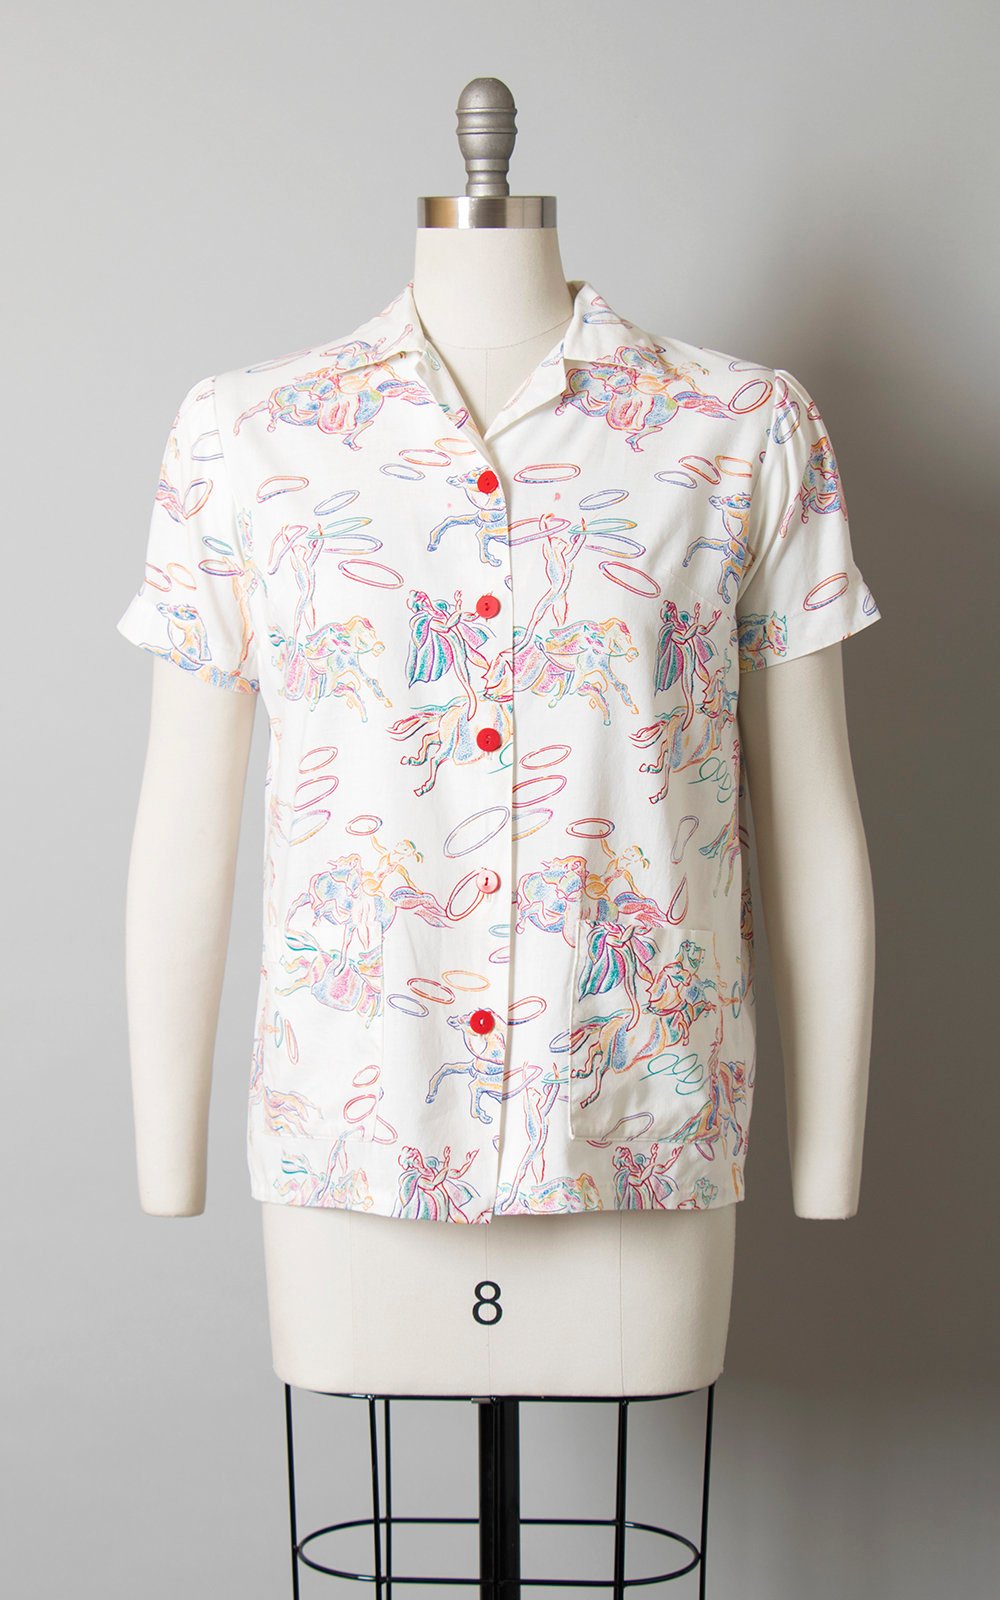 Vintage 1950s Style Blouse | Novelty Print Cotton Circus Horses White Button Up Pajama Top (medium/large)